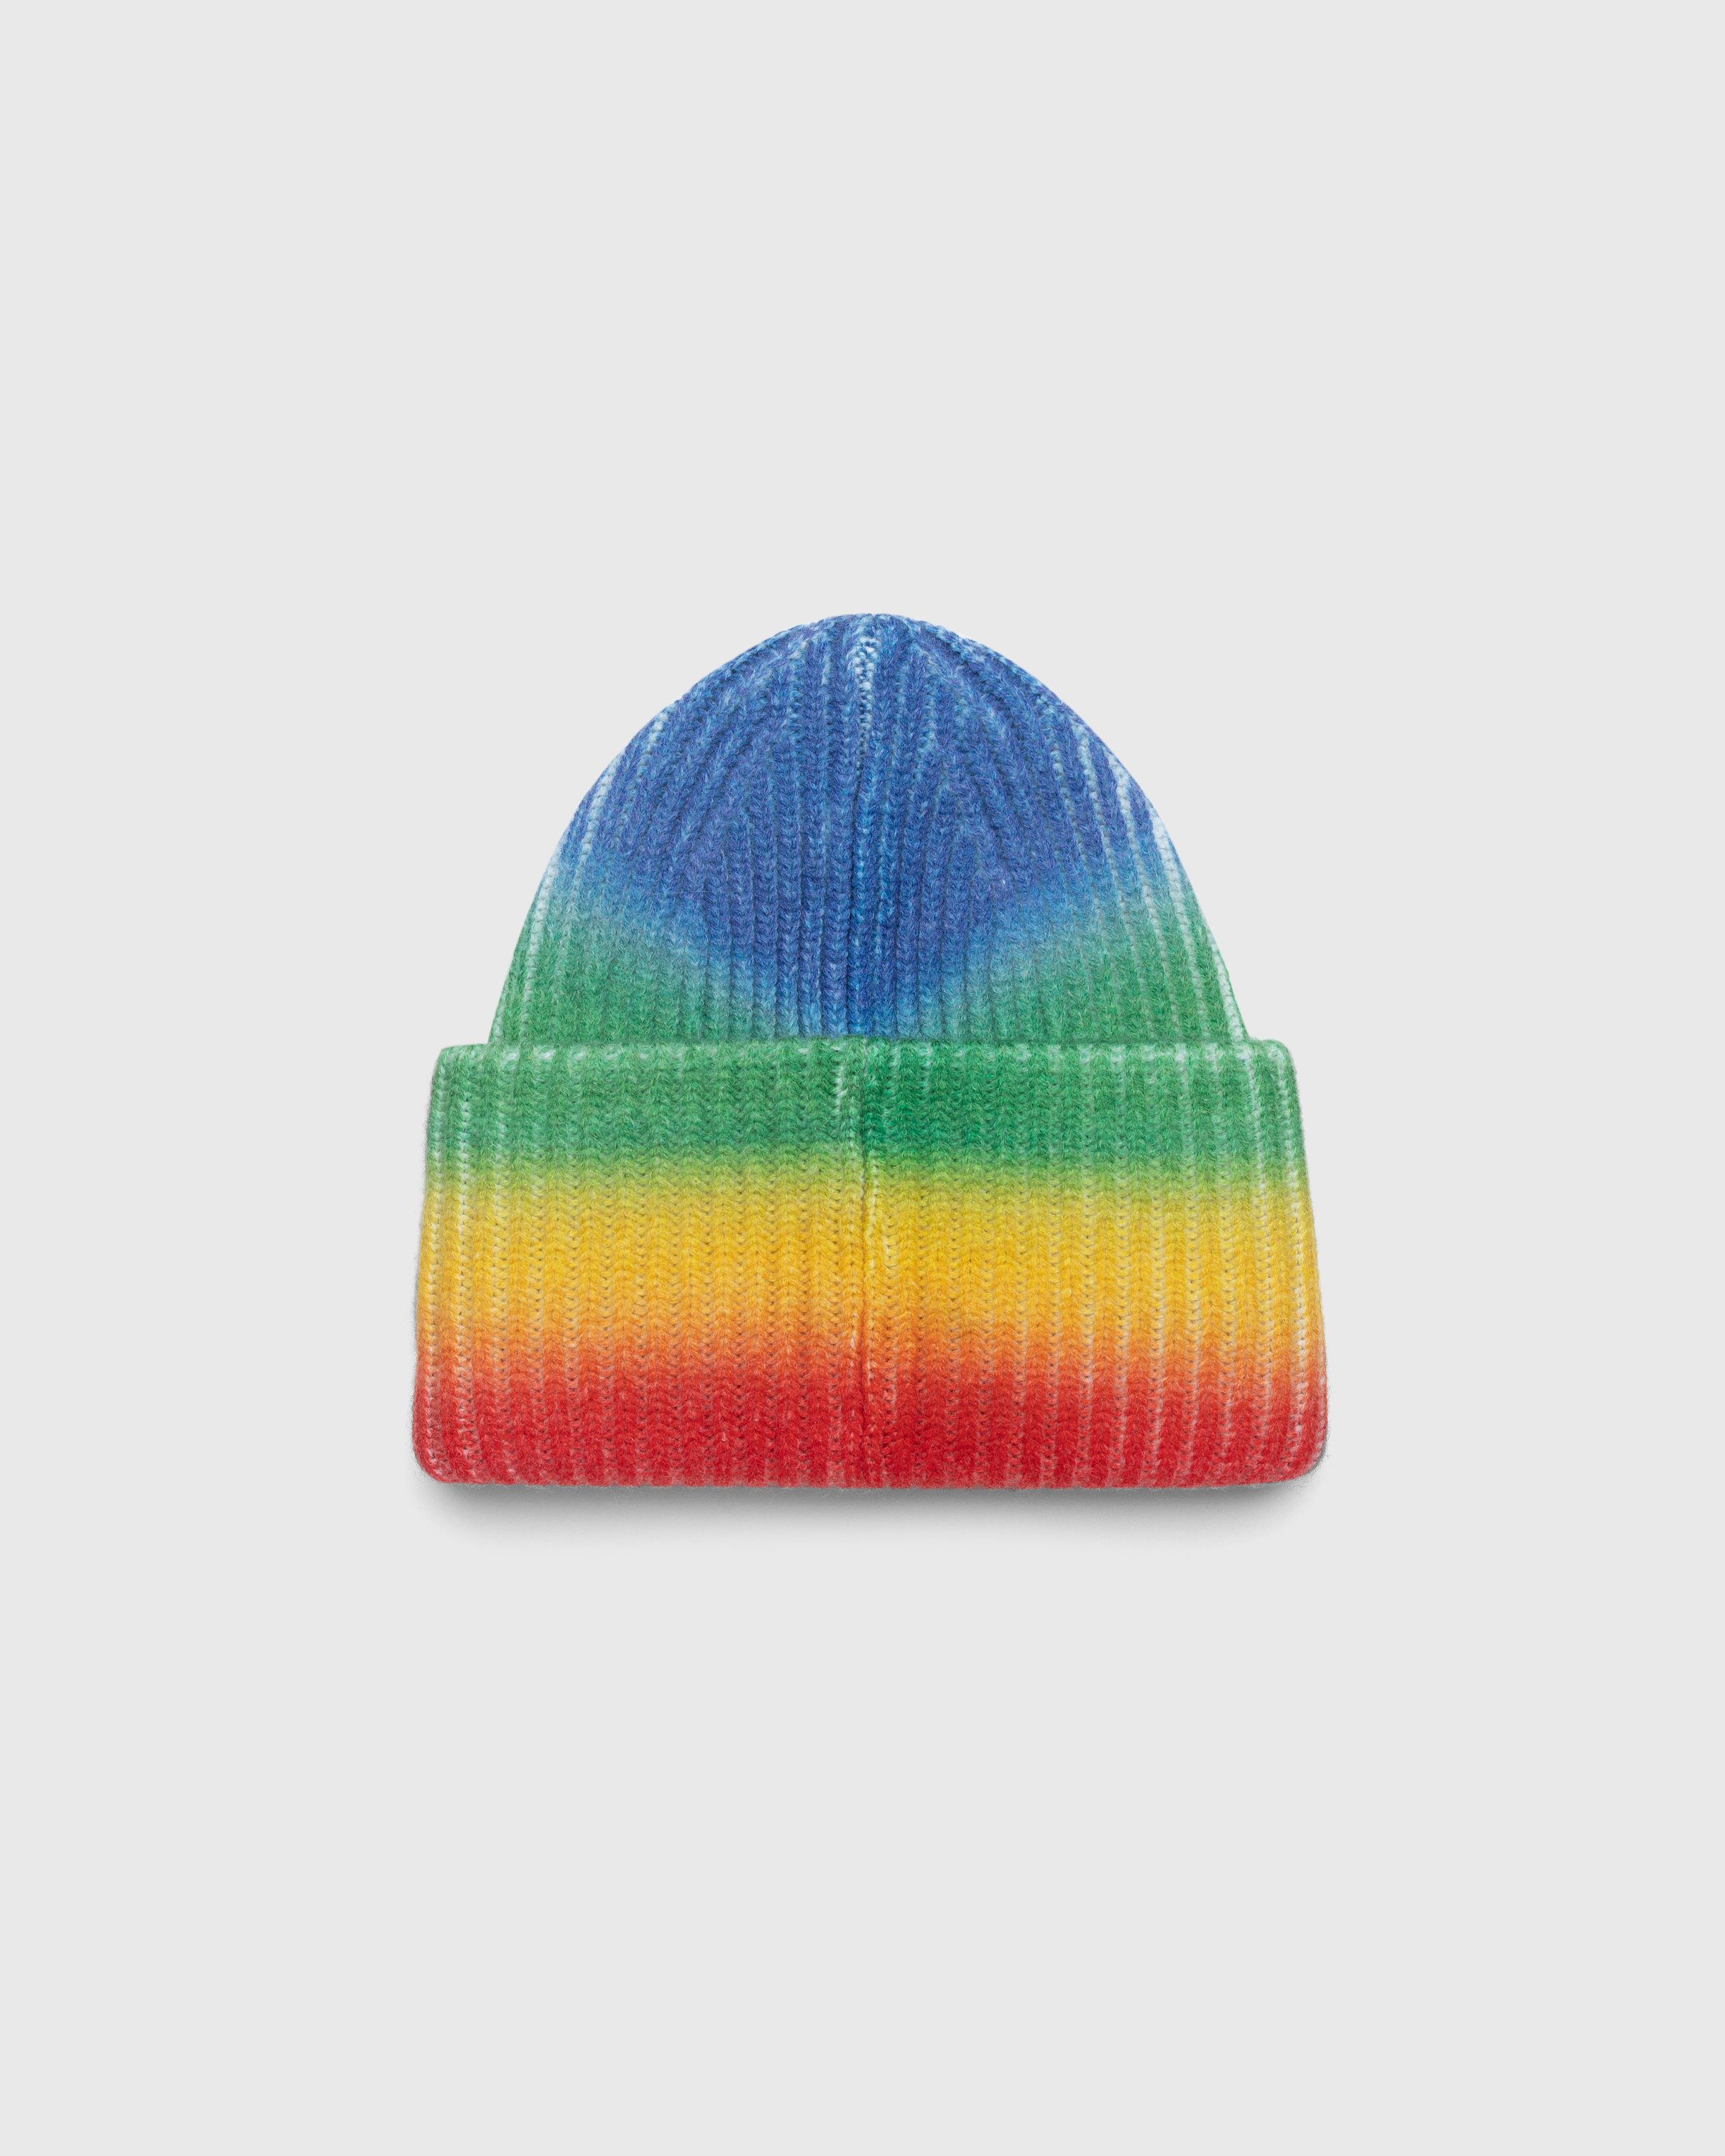 Acne Studios - Knit Face Patch Beanie Coral Red/Green - Accessories - Multi - Image 2